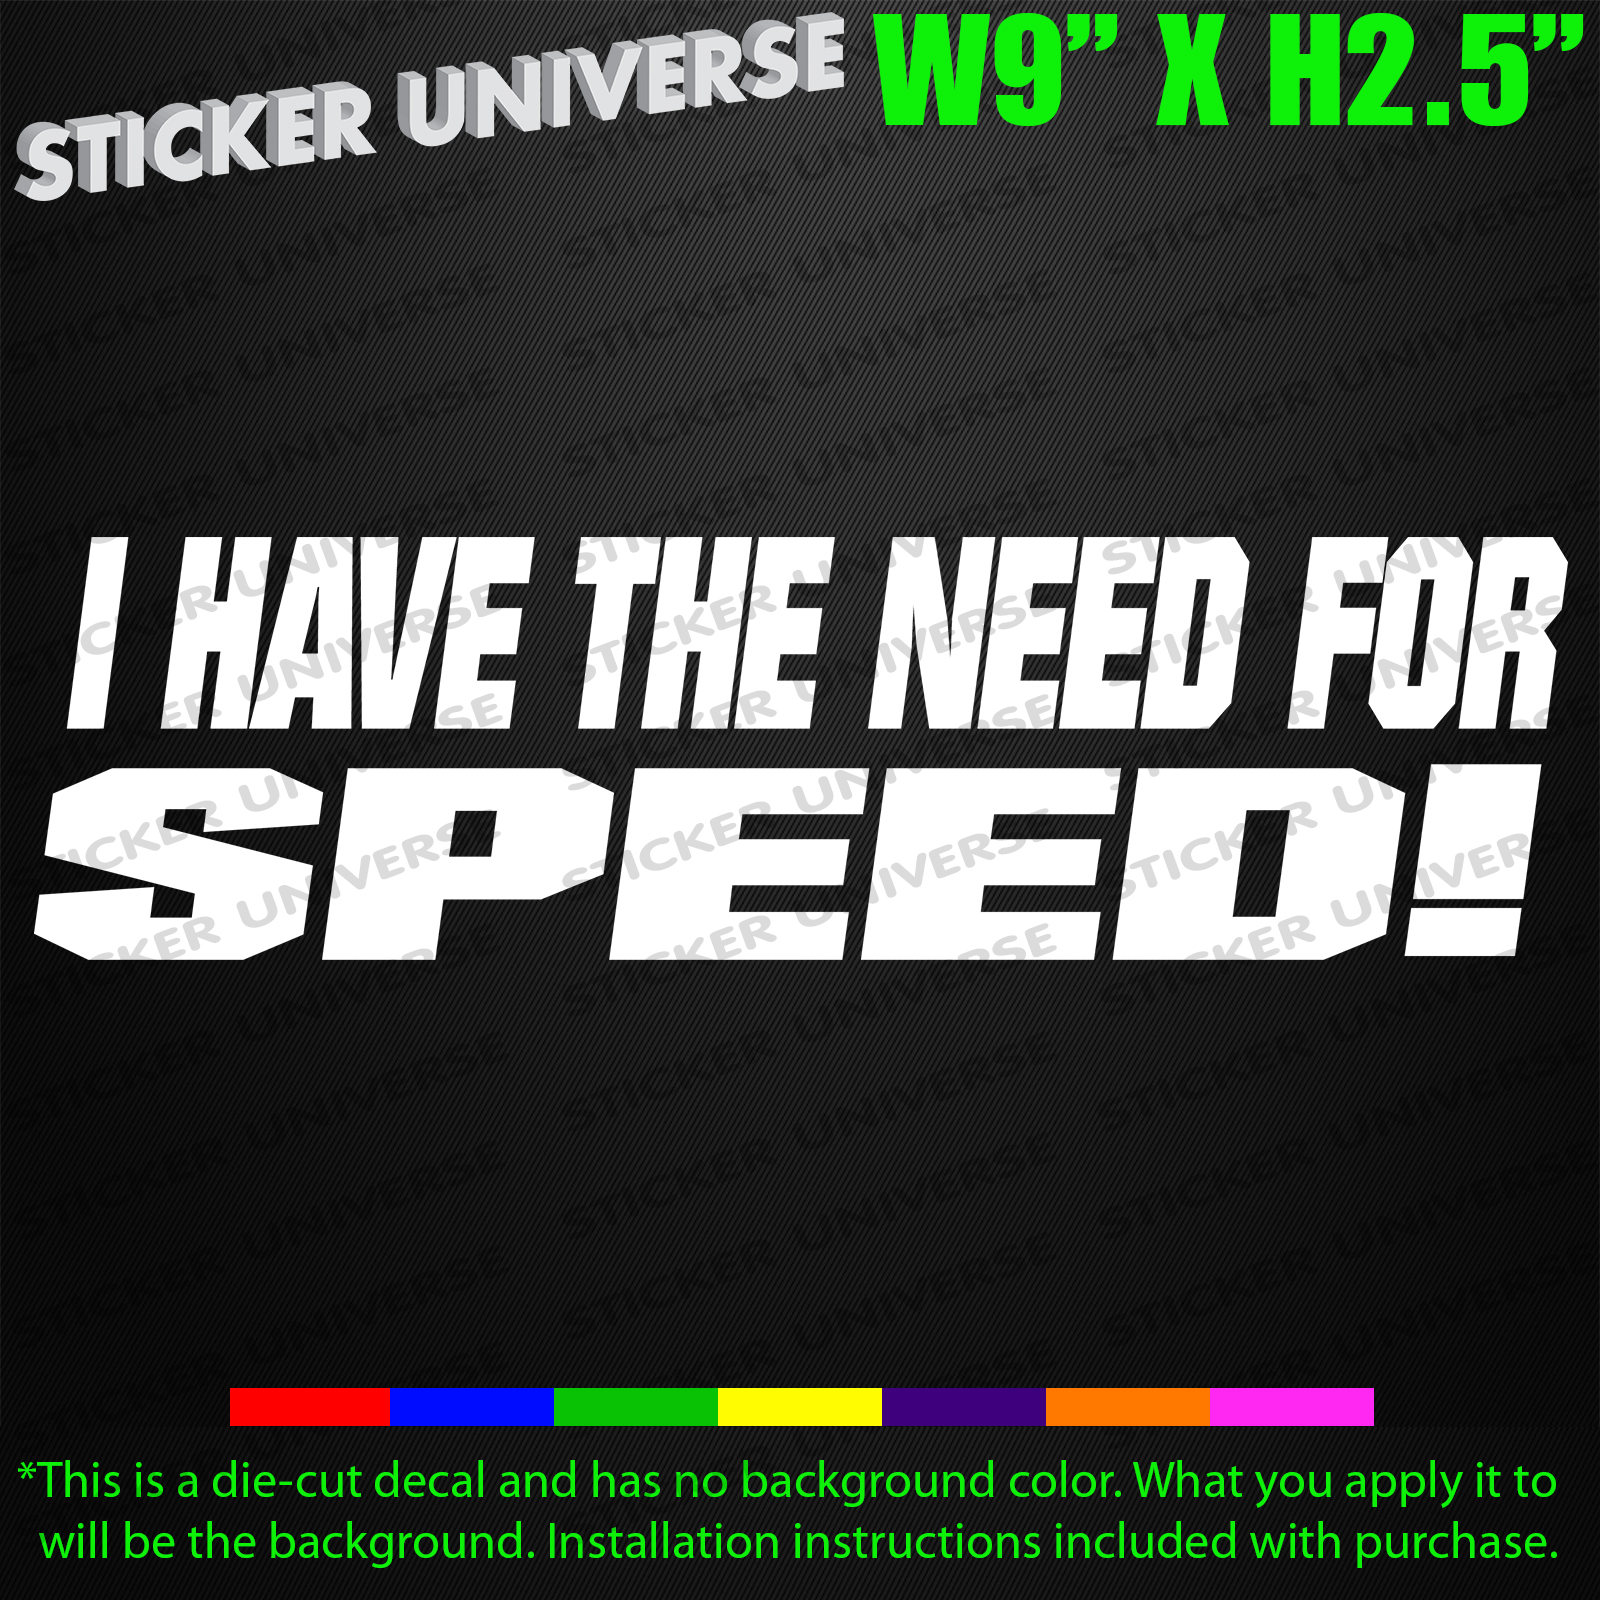 I Feel The Need The Need For Speed VINYL DECAL STICKER Car Window